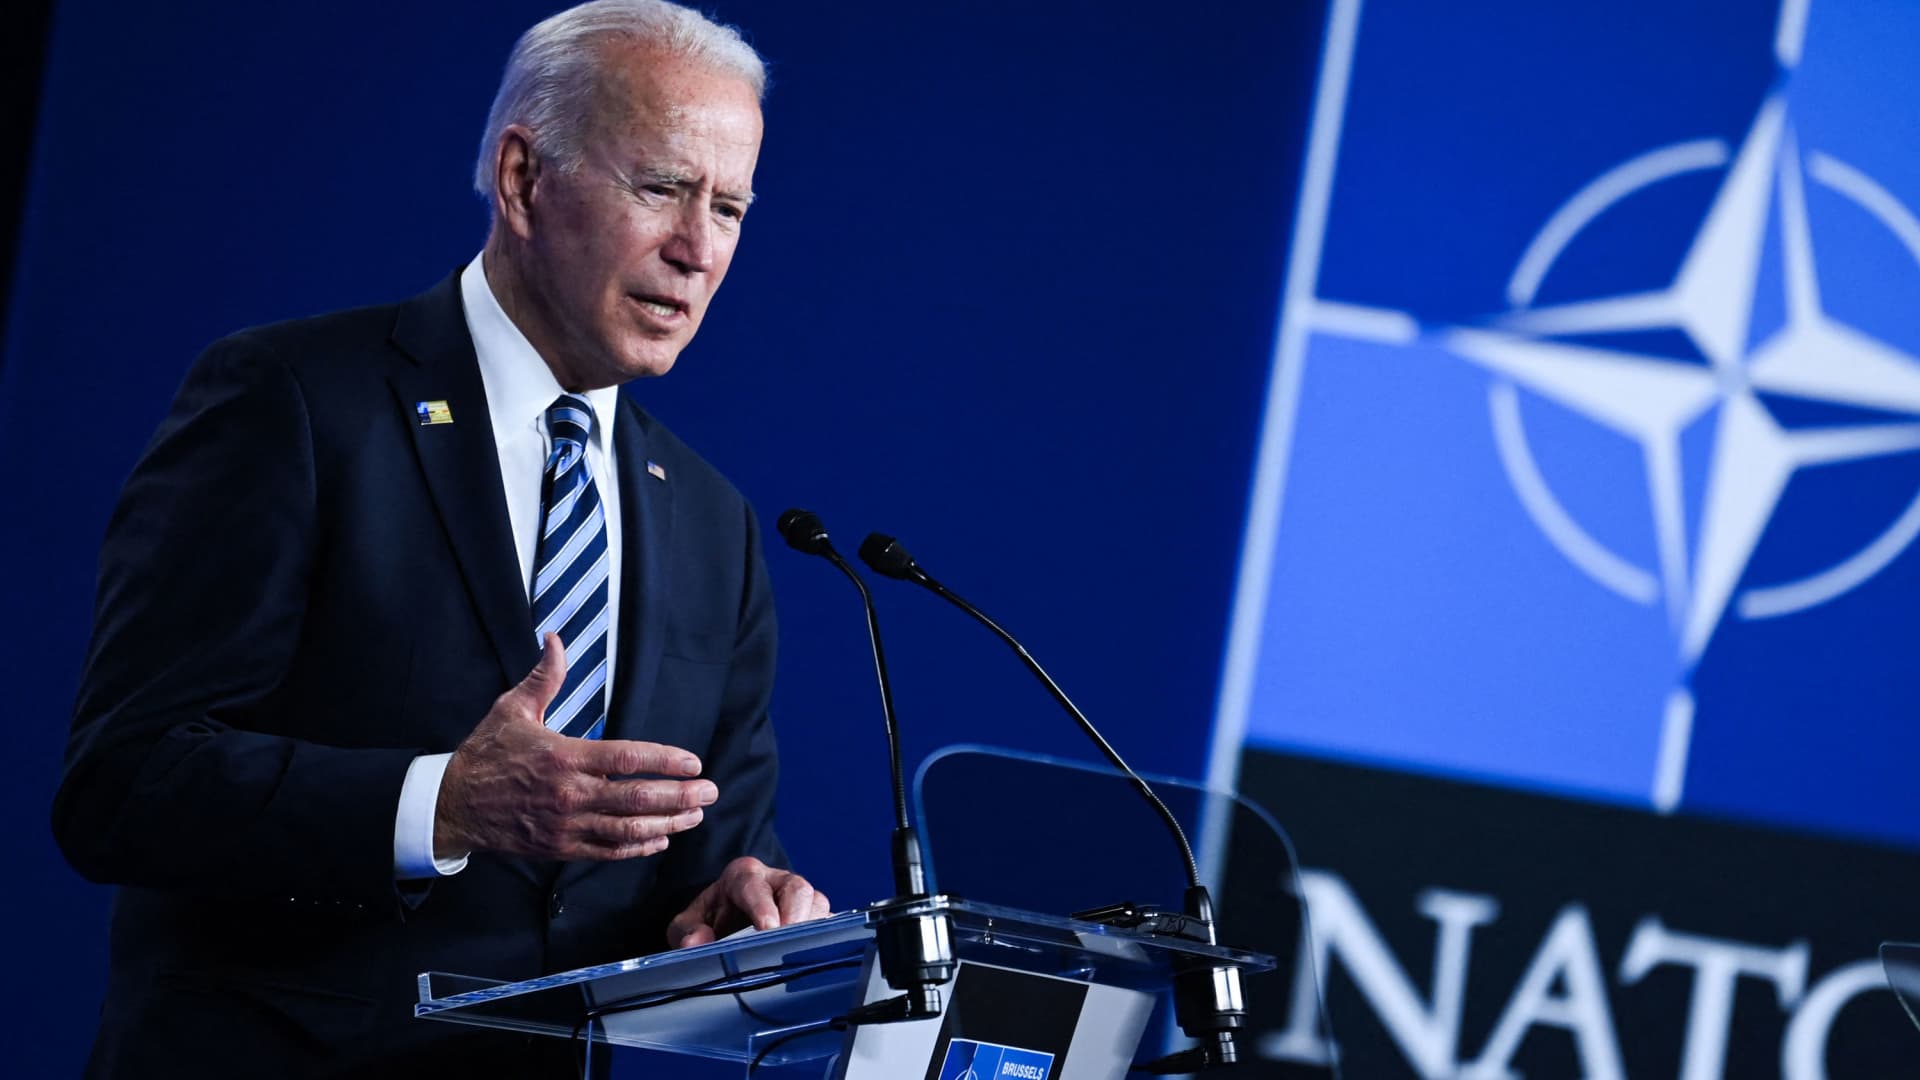 US President Joe Biden speaks during a press conference after the NATO summit at the North Atlantic Treaty Organization (NATO) headquarters in Brussels, on June 14, 2021.